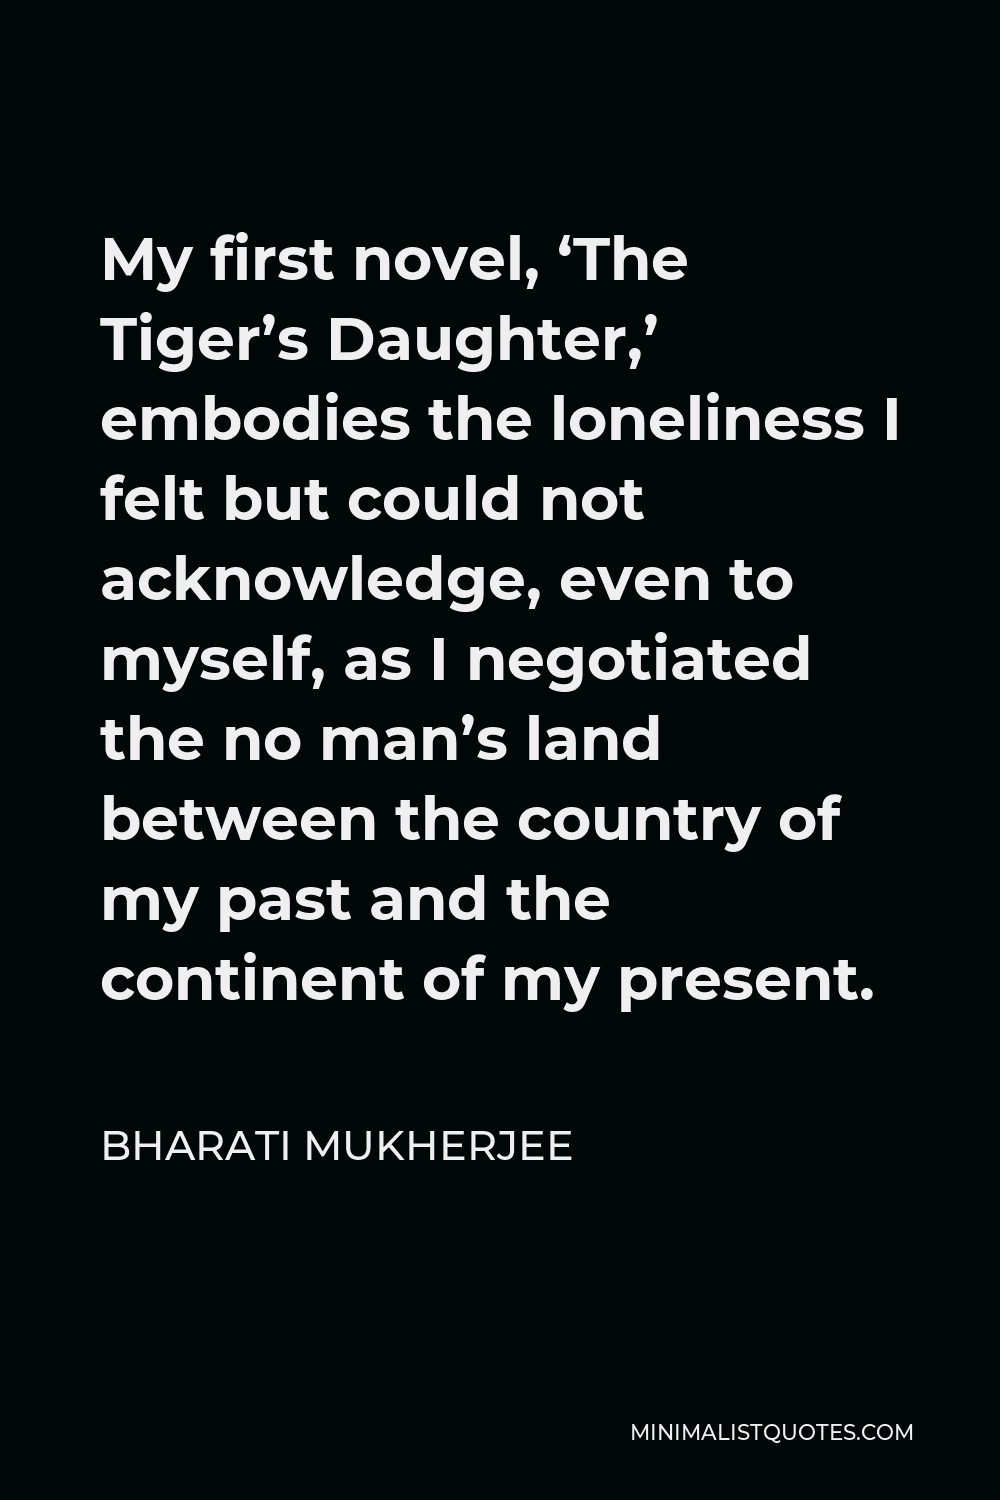 Bharati Mukherjee Quote - My first novel, ‘The Tiger’s Daughter,’ embodies the loneliness I felt but could not acknowledge, even to myself, as I negotiated the no man’s land between the country of my past and the continent of my present.